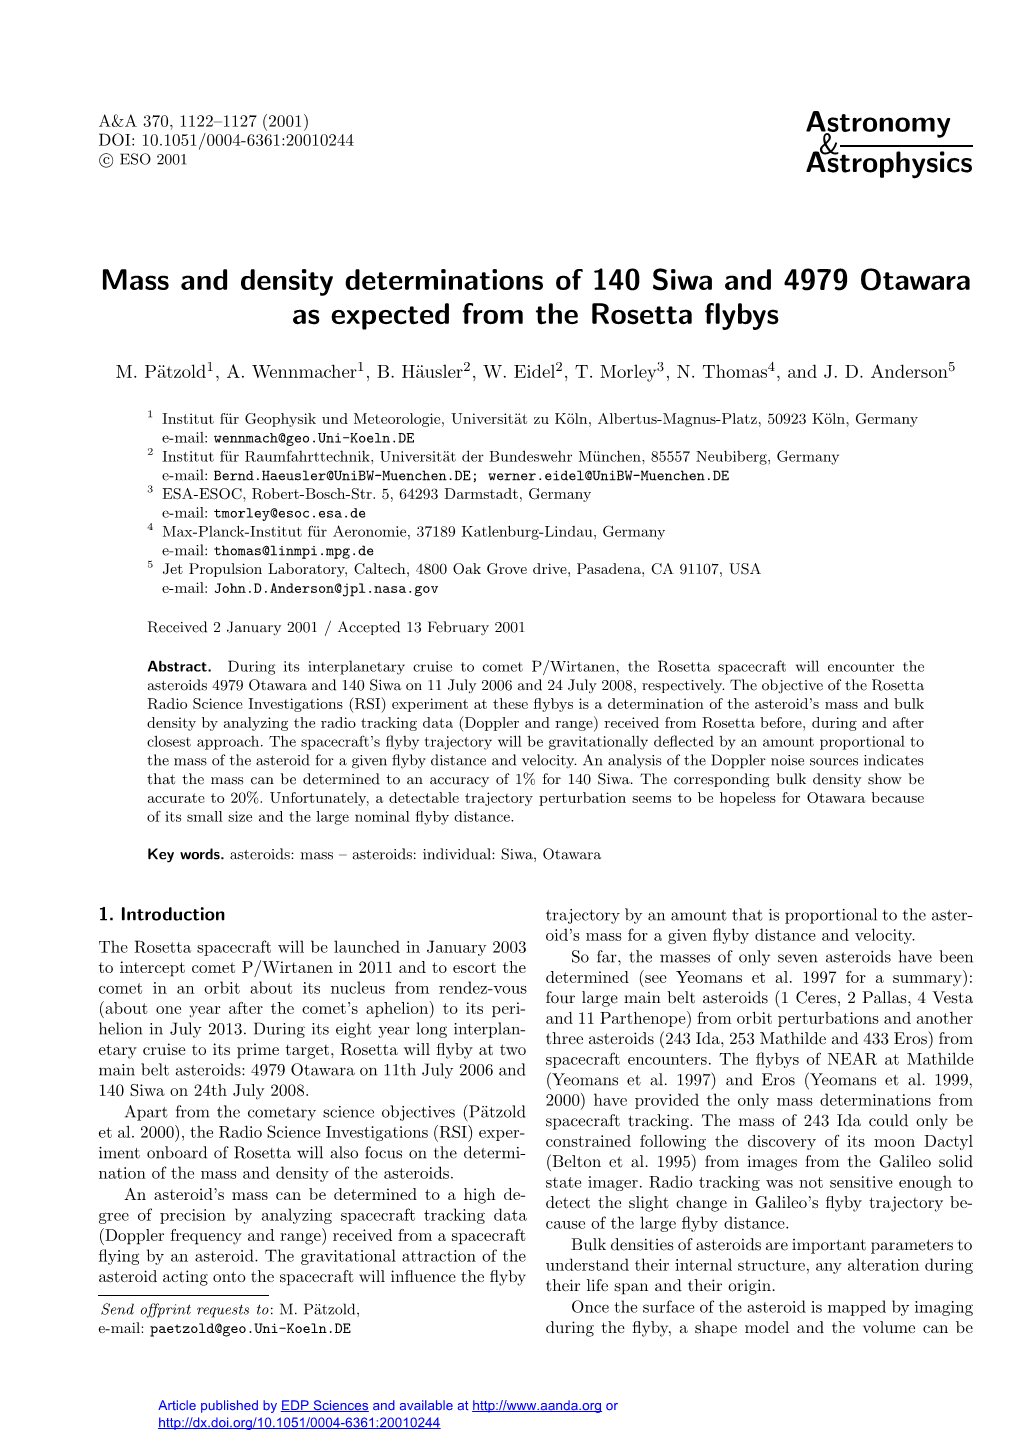 Mass and Density Determinations of 140 Siwa and 4979 Otawara As Expected from the Rosetta ﬂybys